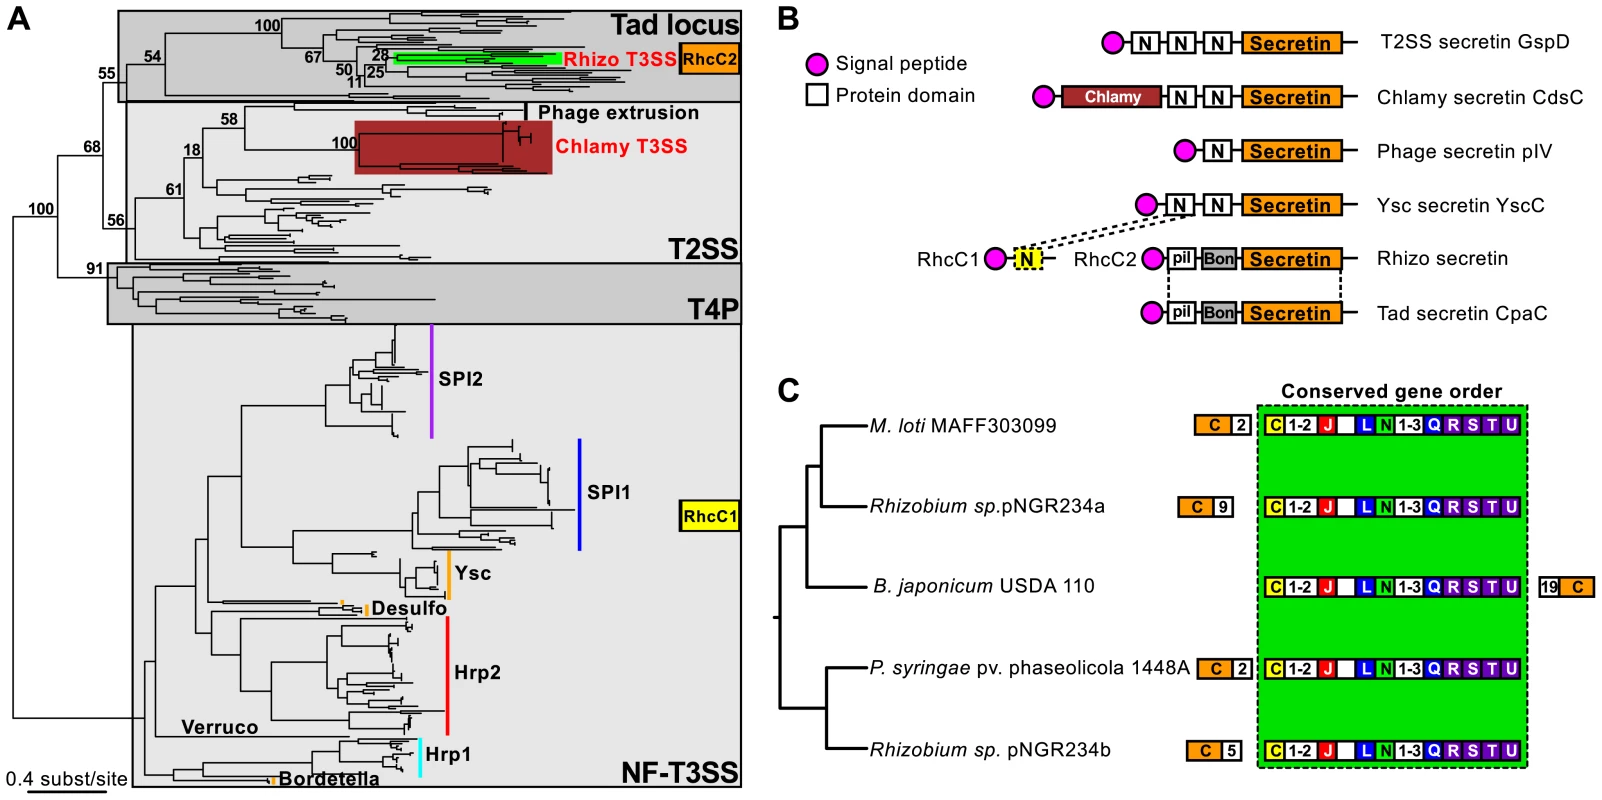 Evolutionary history, domain architecture, and genetic organization of the NF-T3SS secretins.